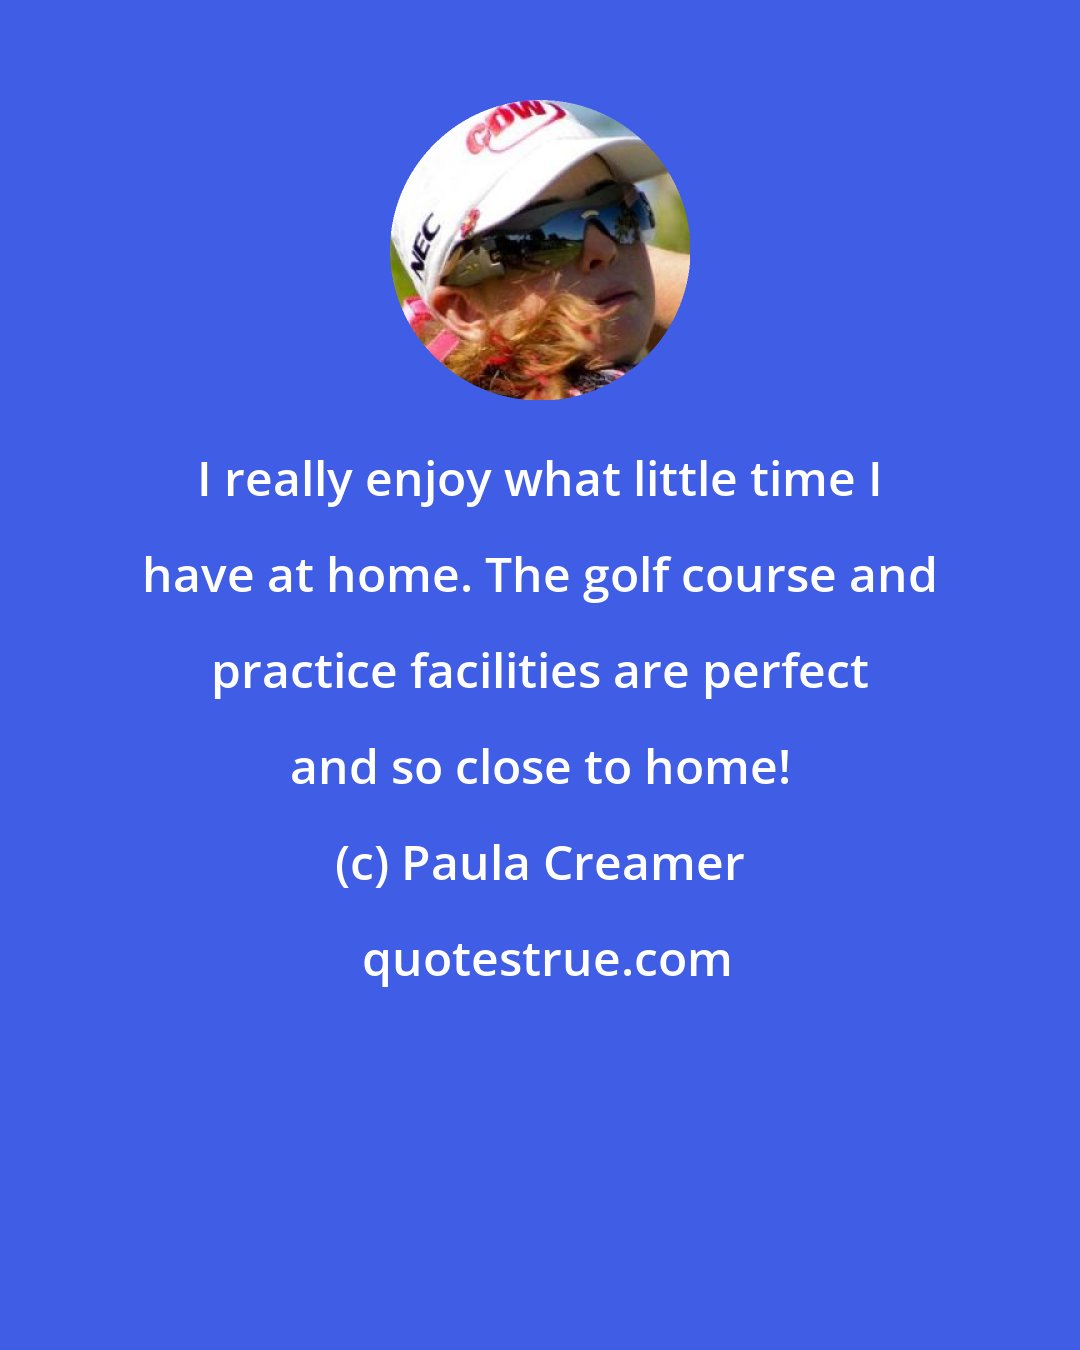 Paula Creamer: I really enjoy what little time I have at home. The golf course and practice facilities are perfect and so close to home!